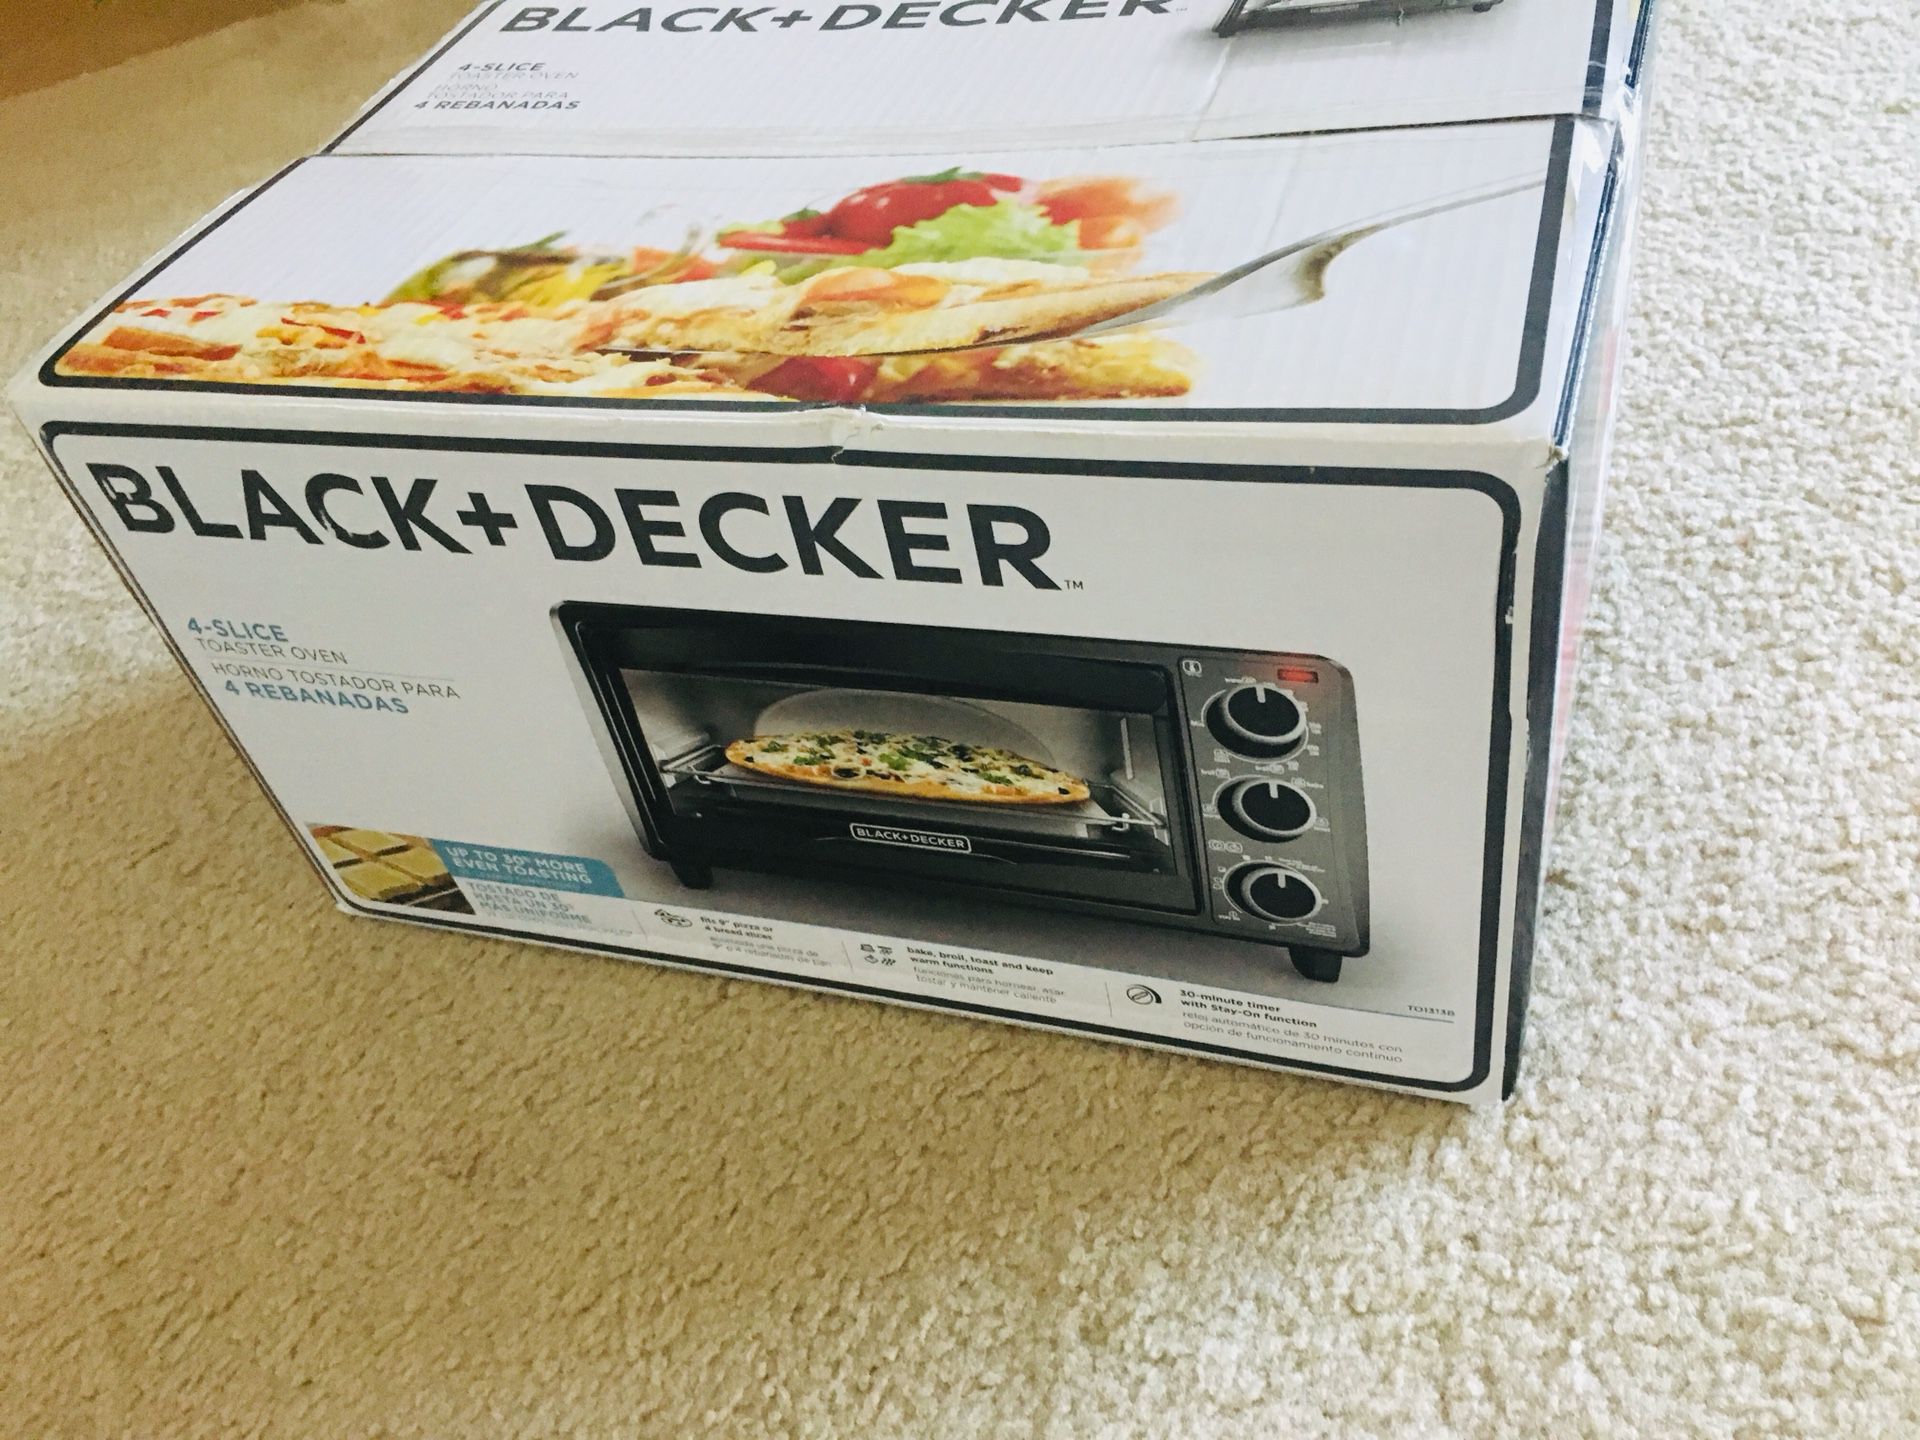 Black and Decker toaster oven - like new